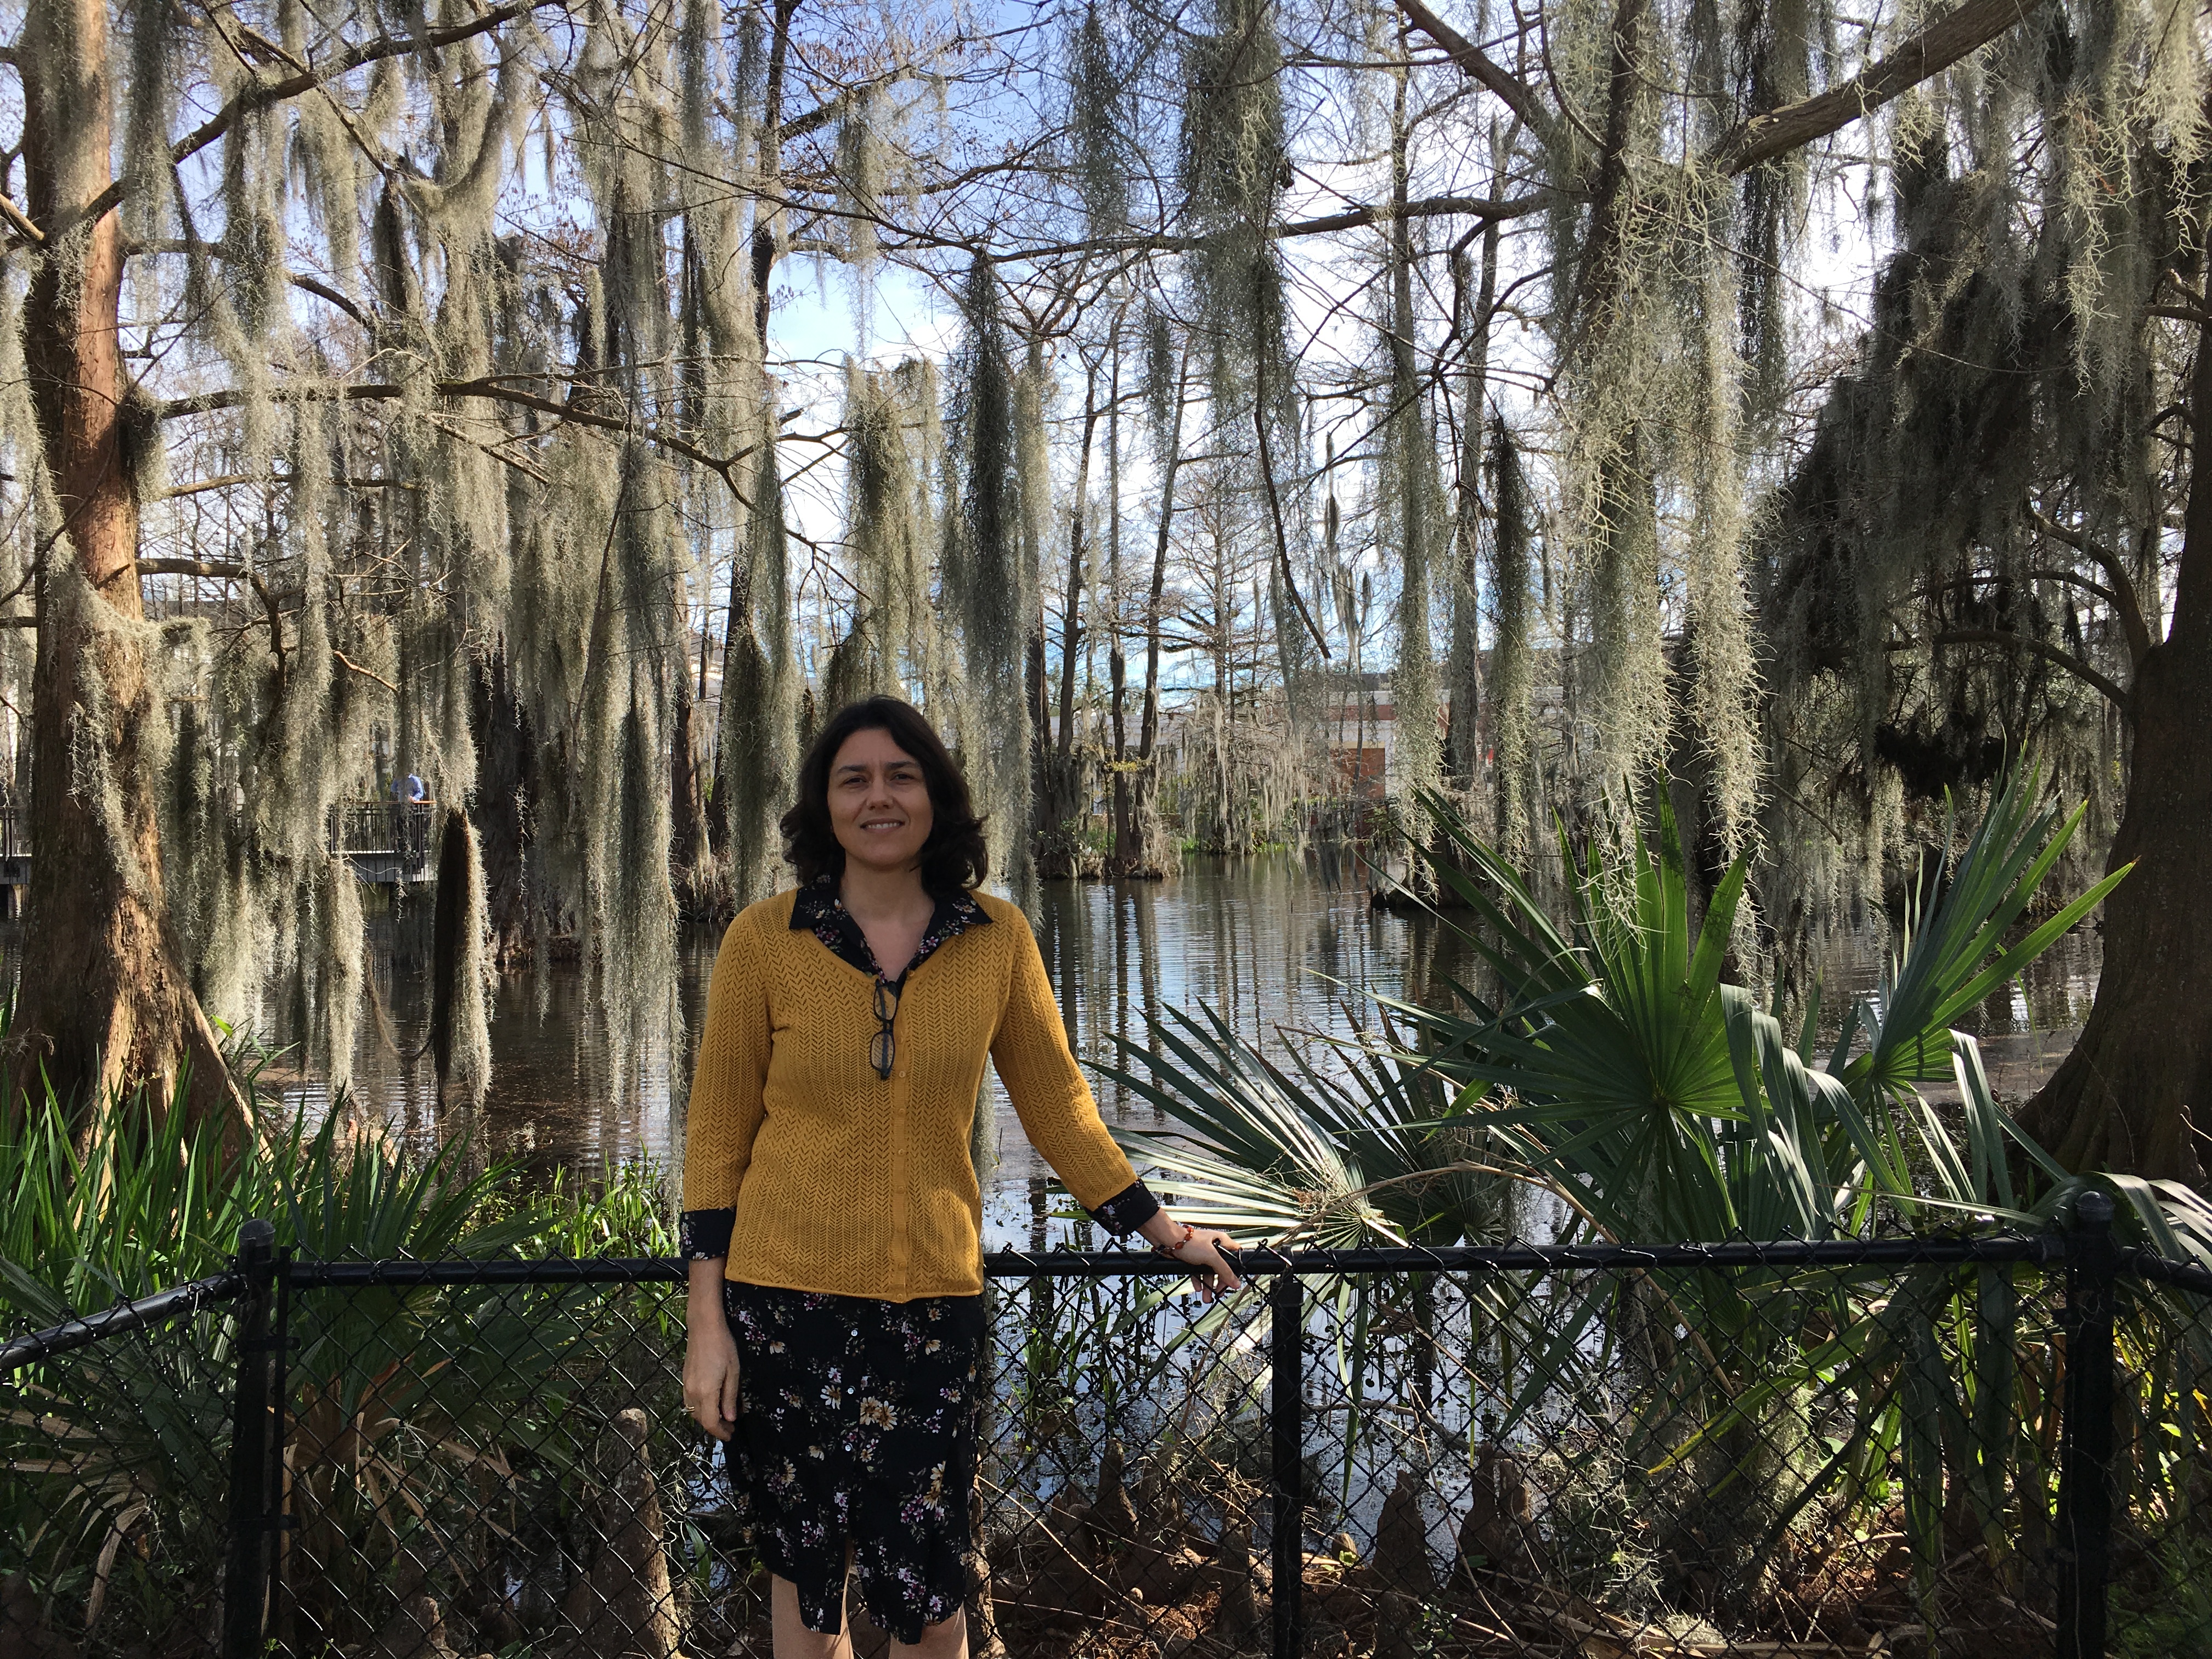 by Cypress Lake, ULL campus